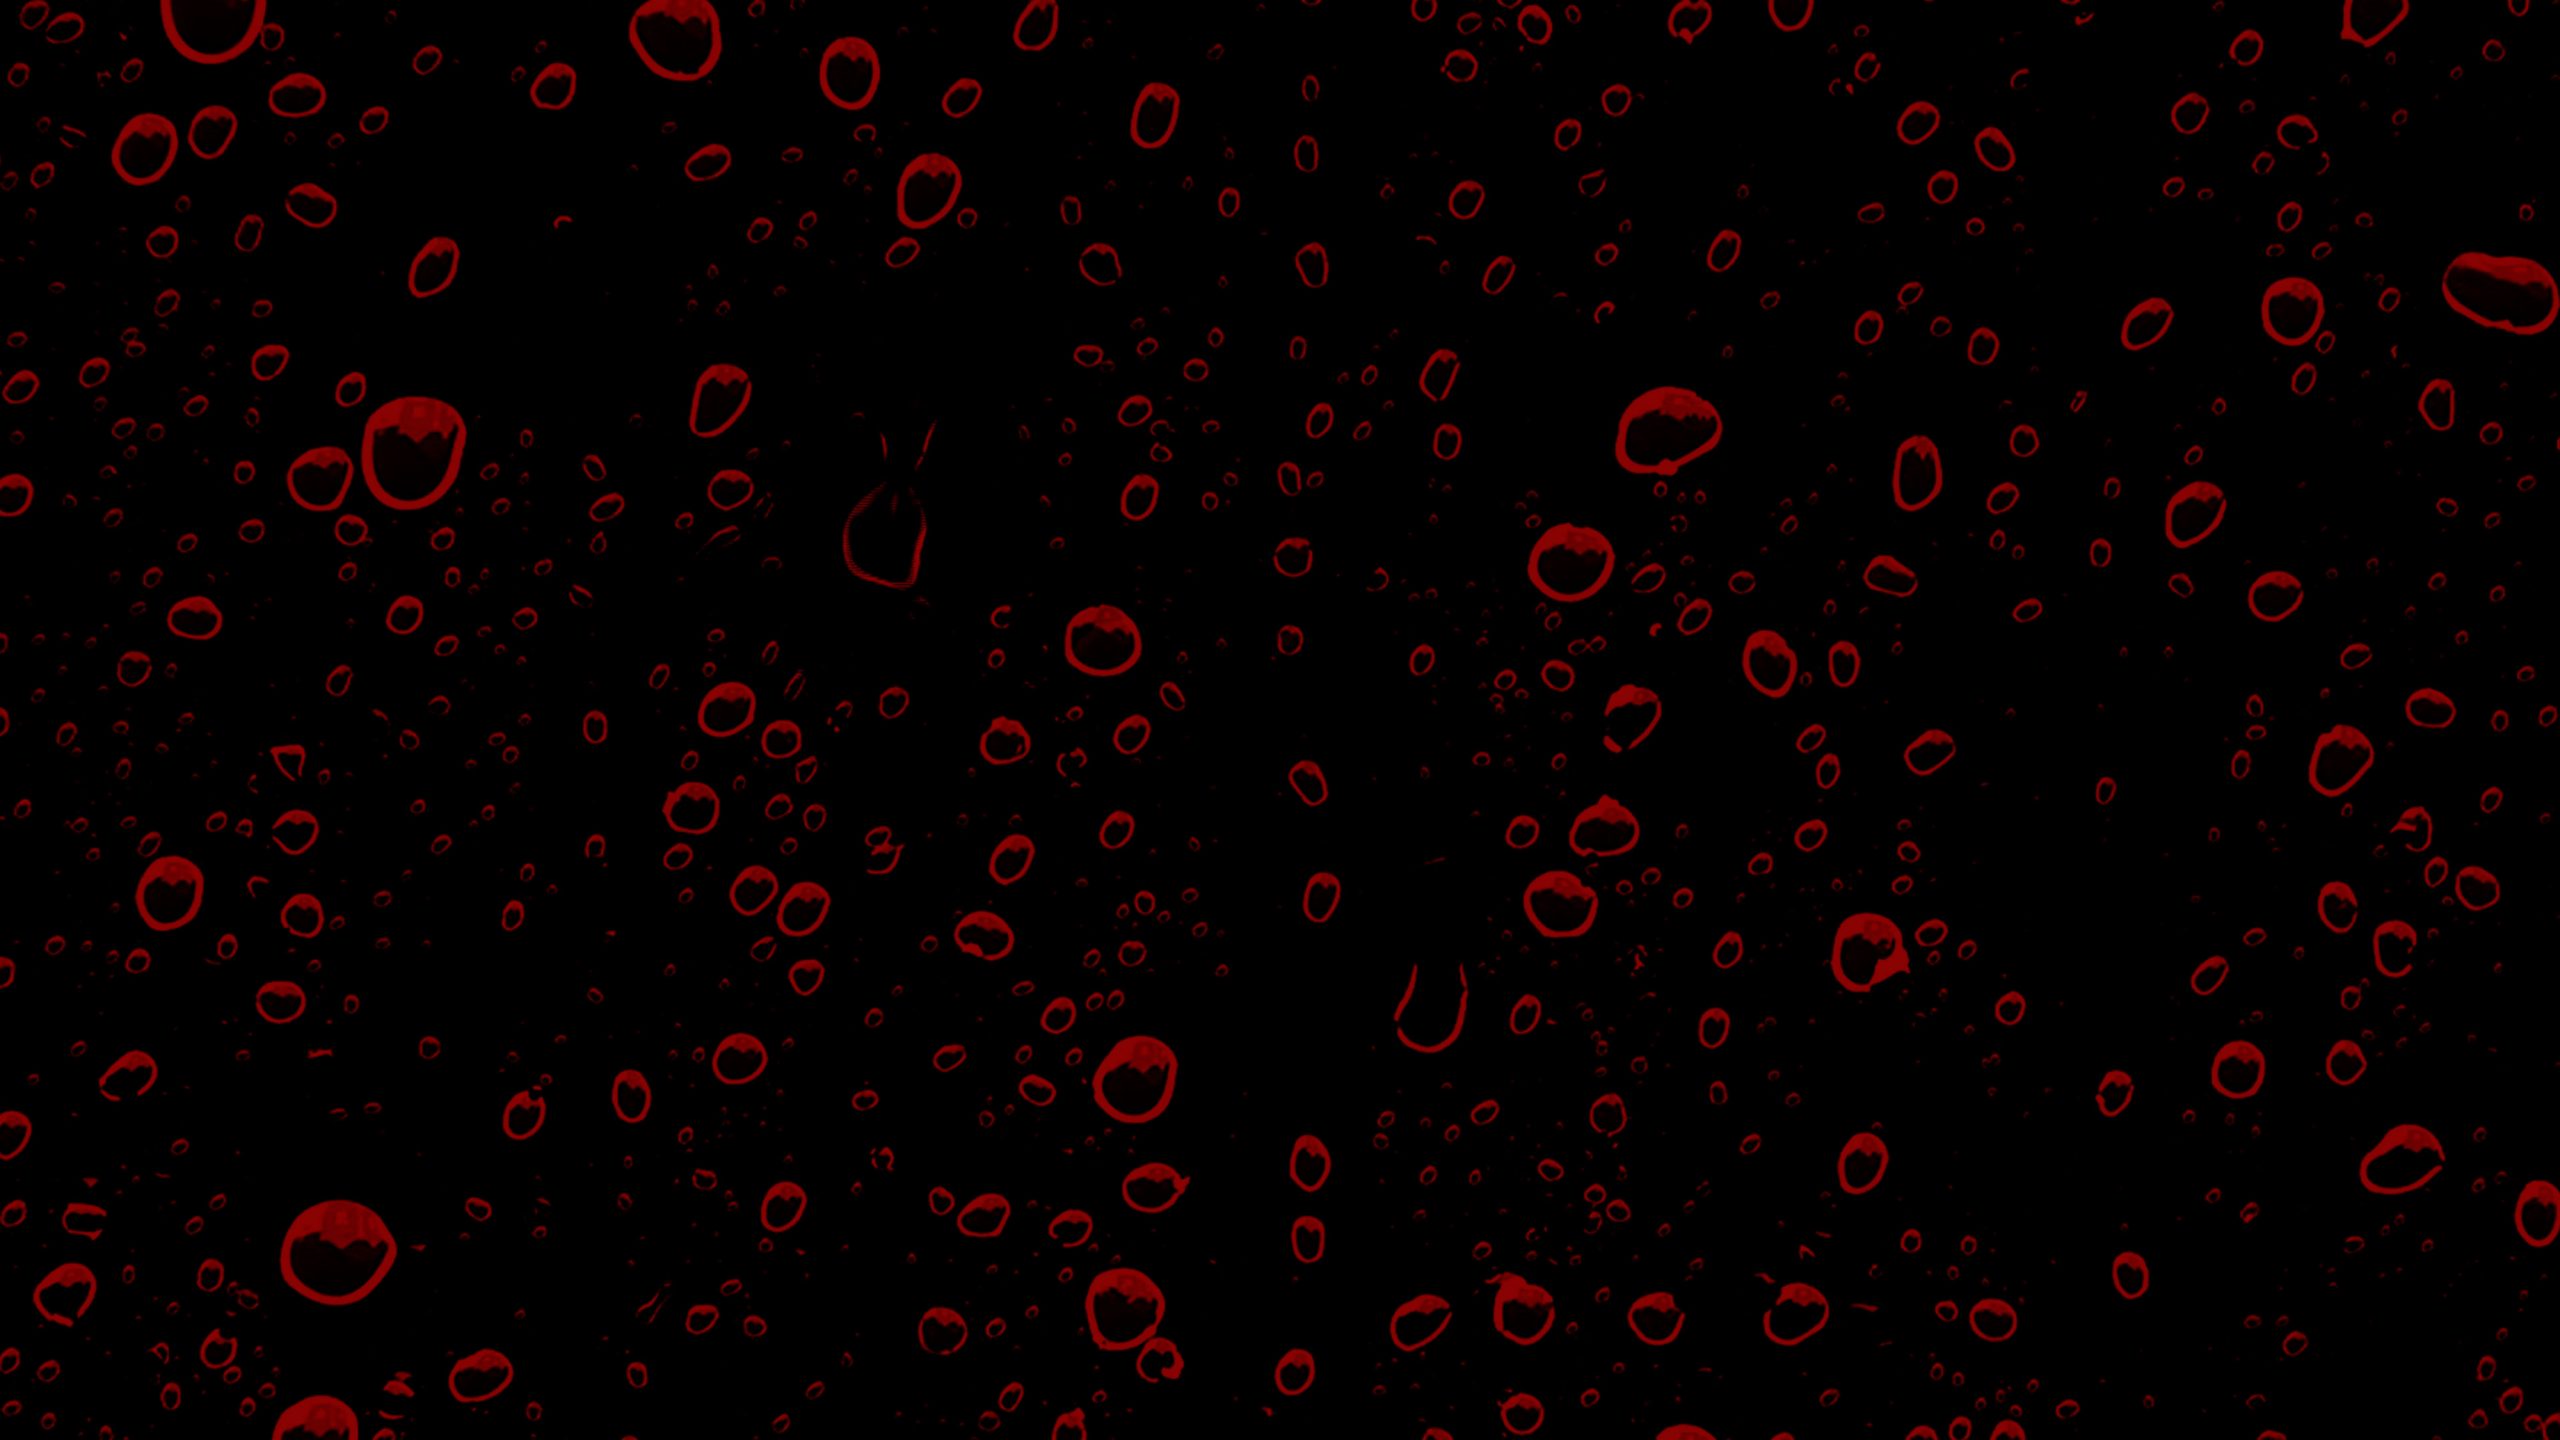 Red bubbles in dark place wallpaper